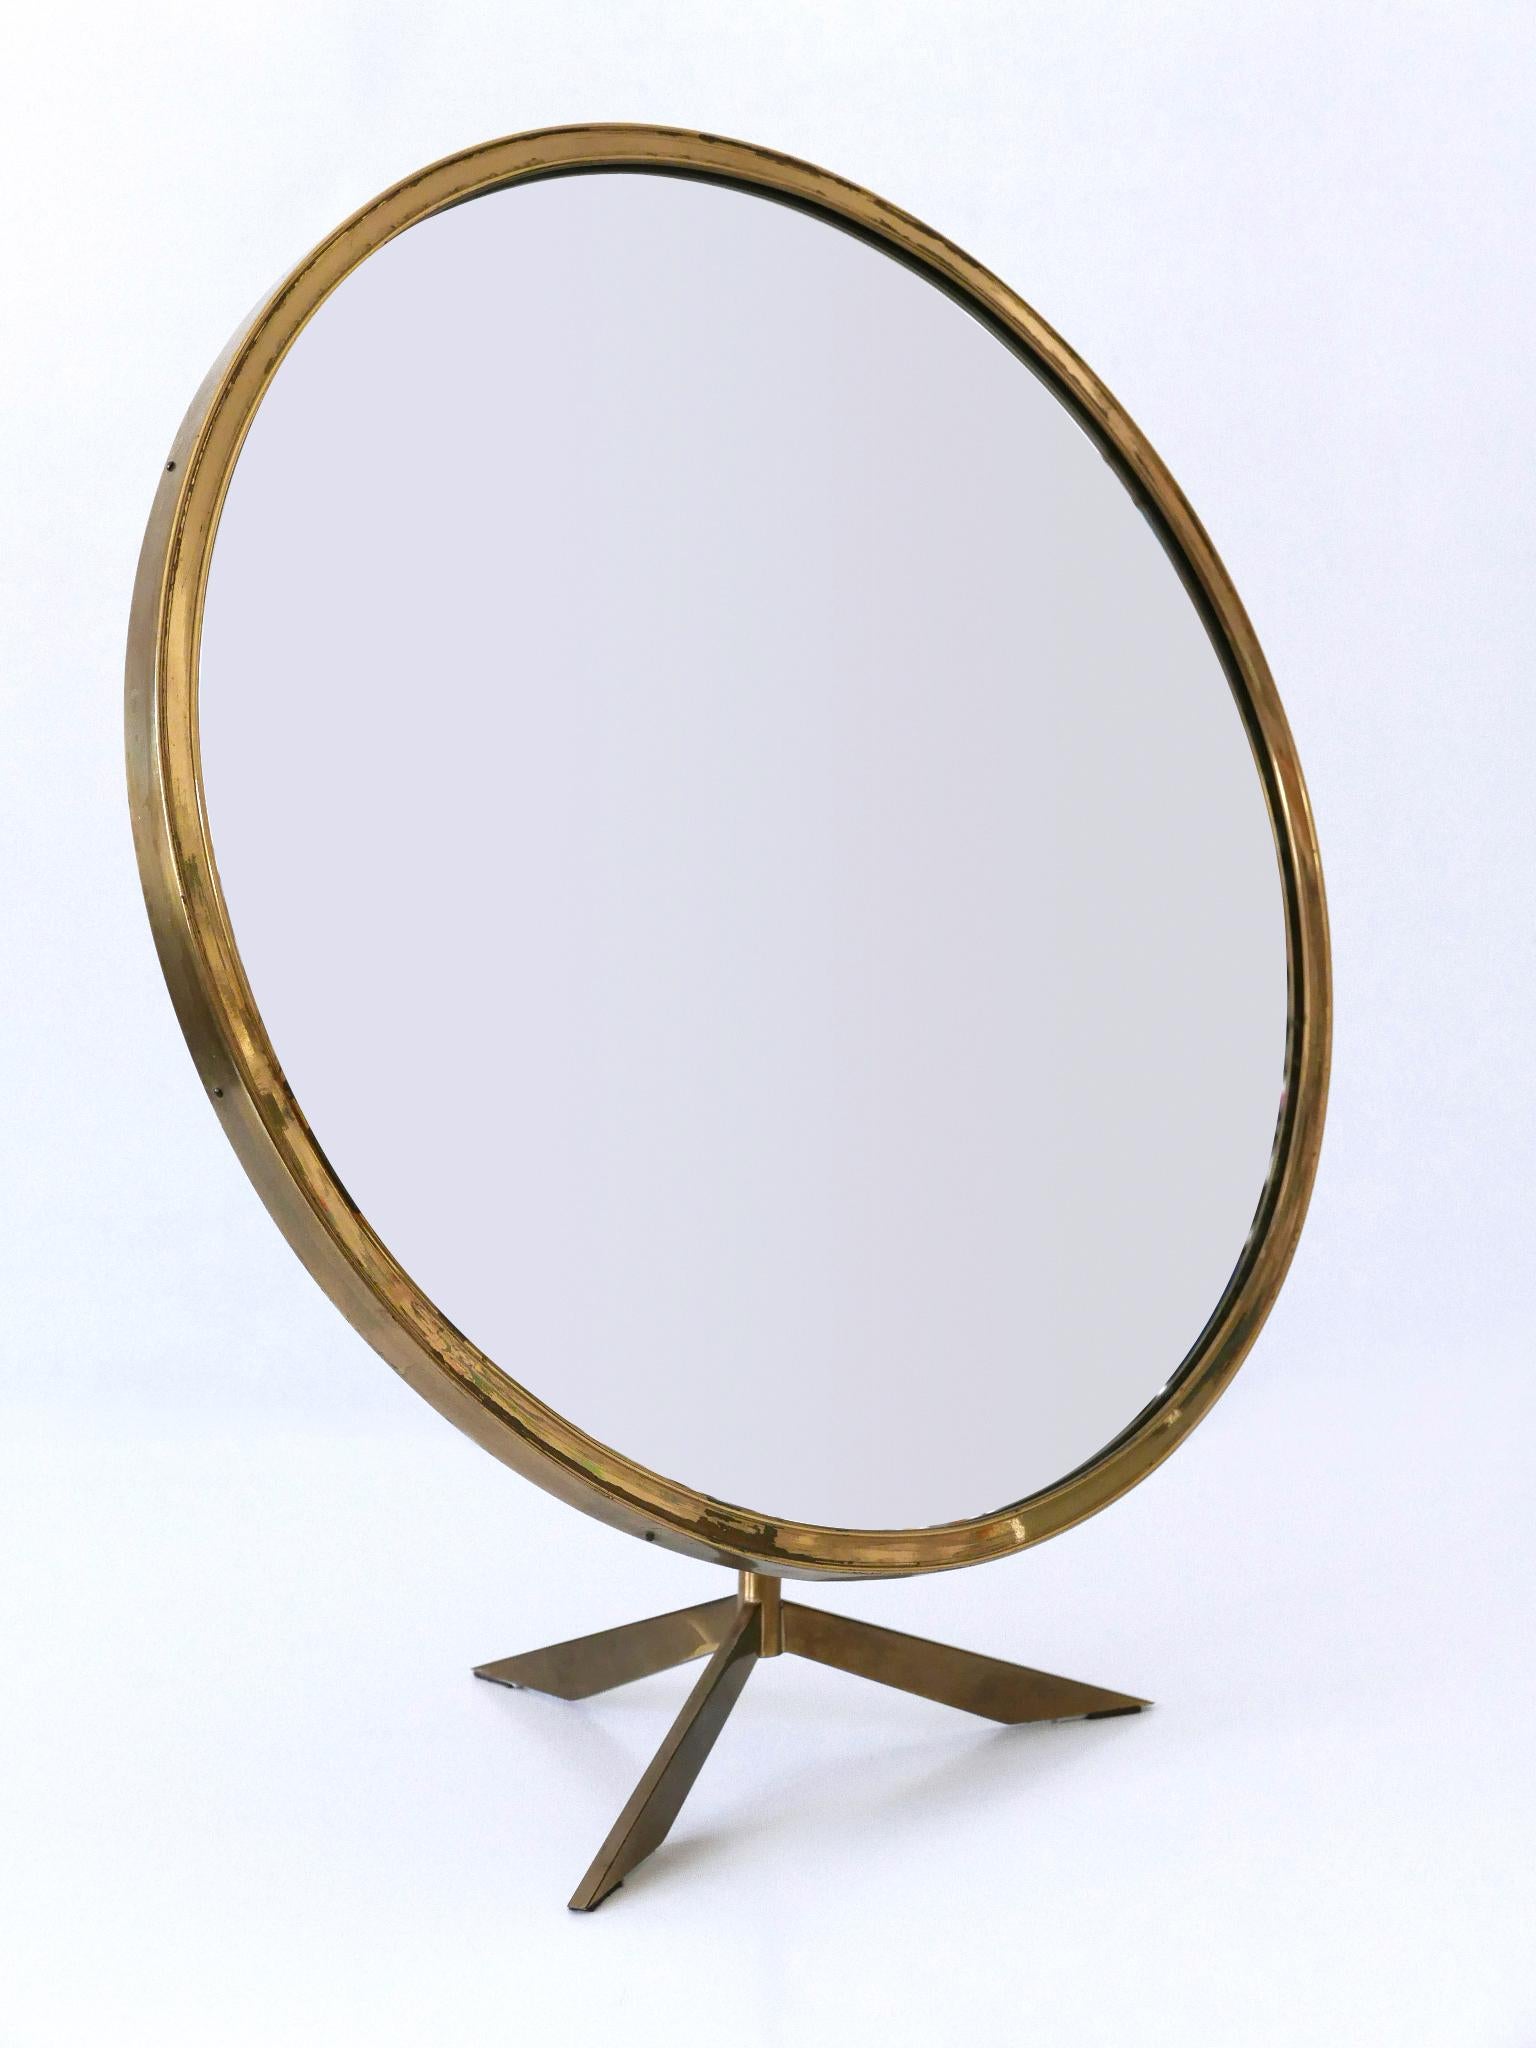 Mid-20th Century Elegant Mid-Century Modern Wall or Vanity Mirror by Zierform Germany 1950s For Sale